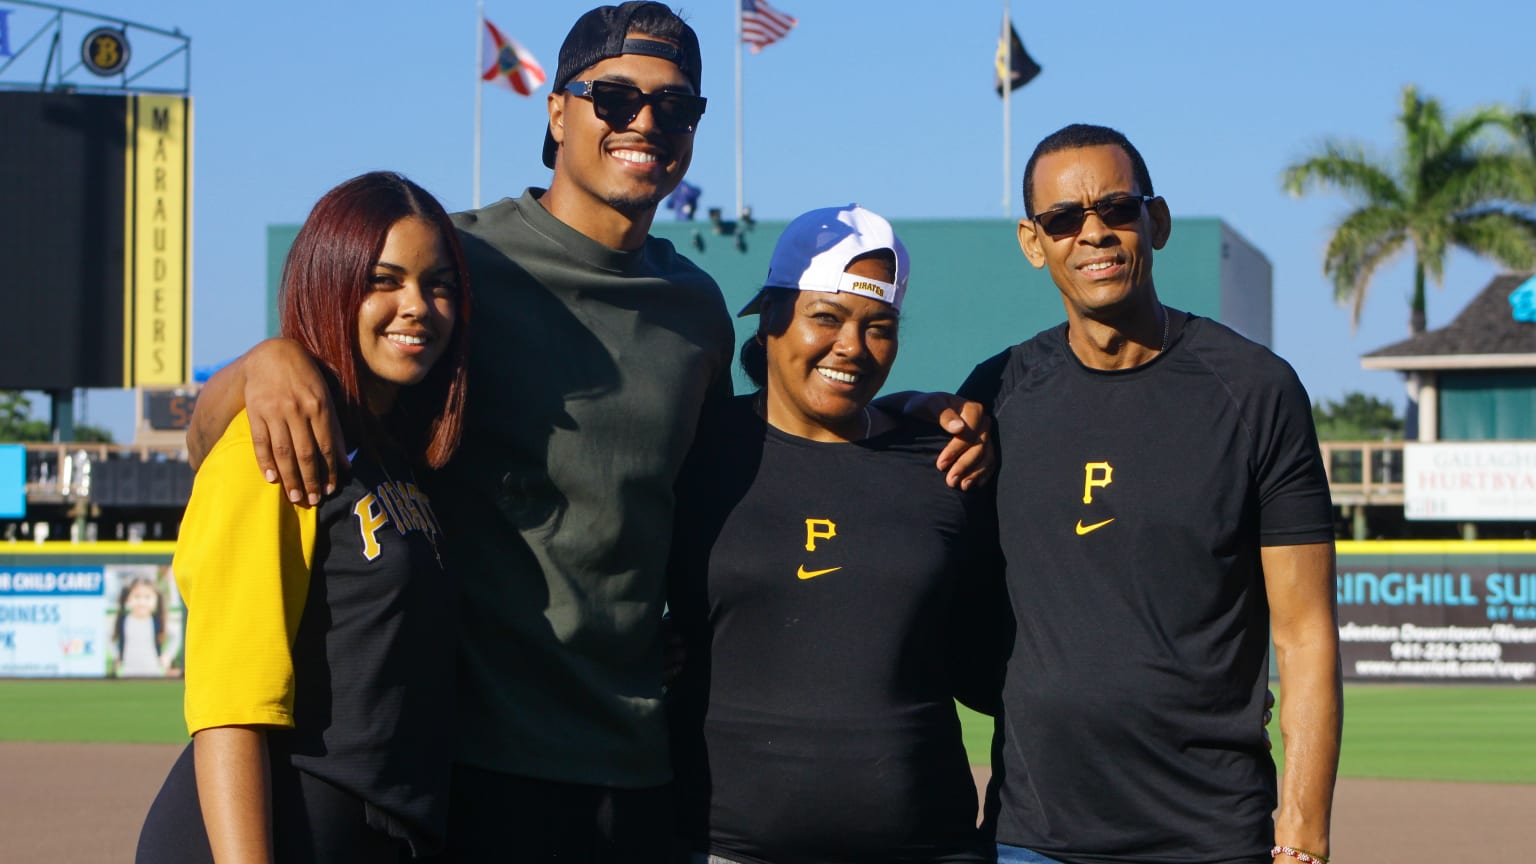 Pirates pitcher Johan Oviedo poses for a photo with parents and sister